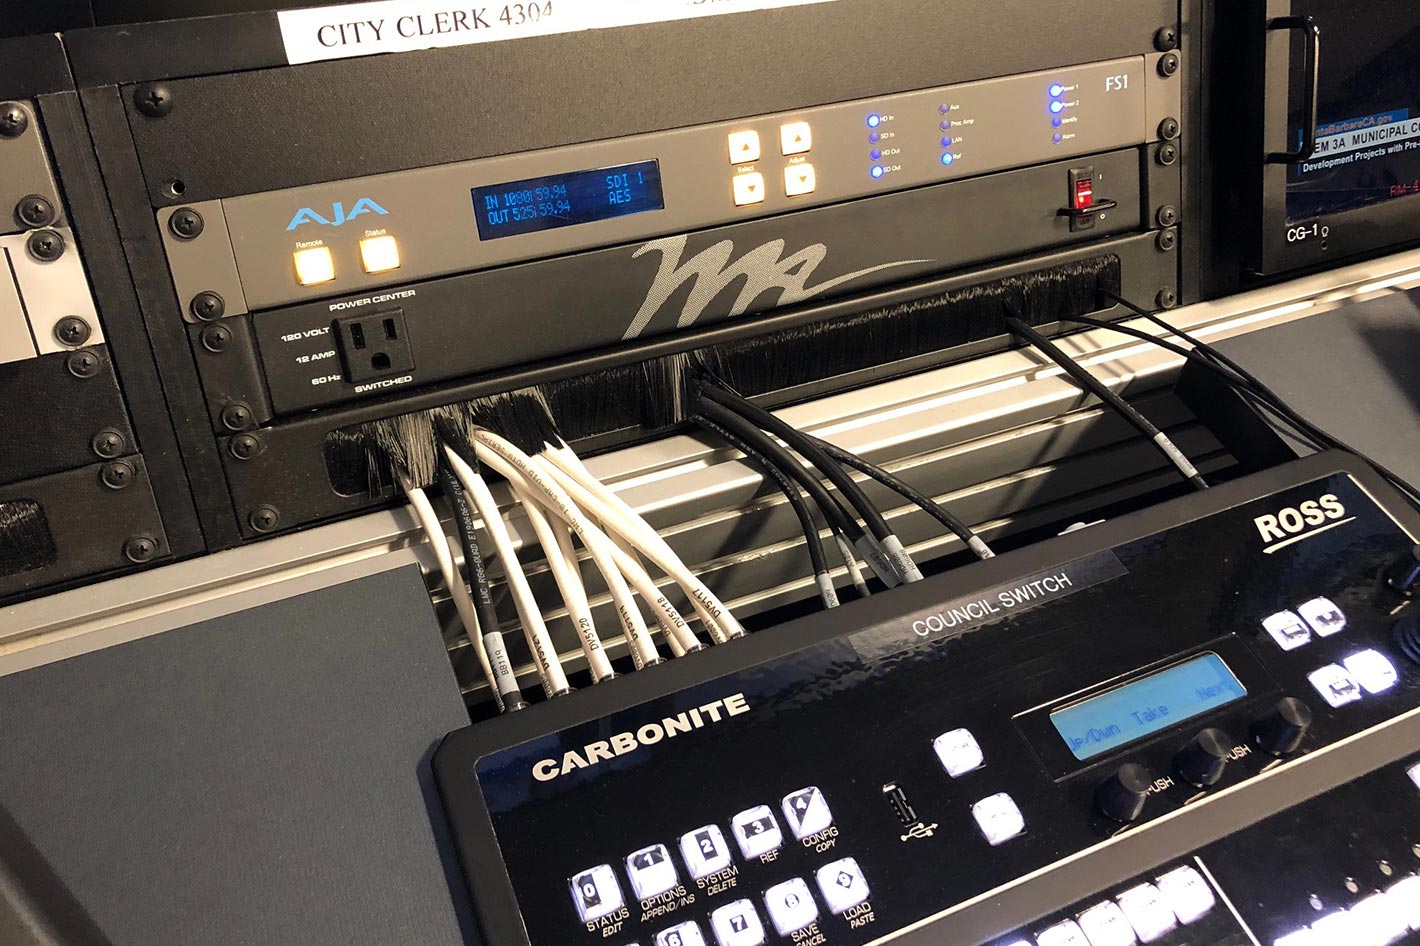 AJA Video Systems gear powers local community